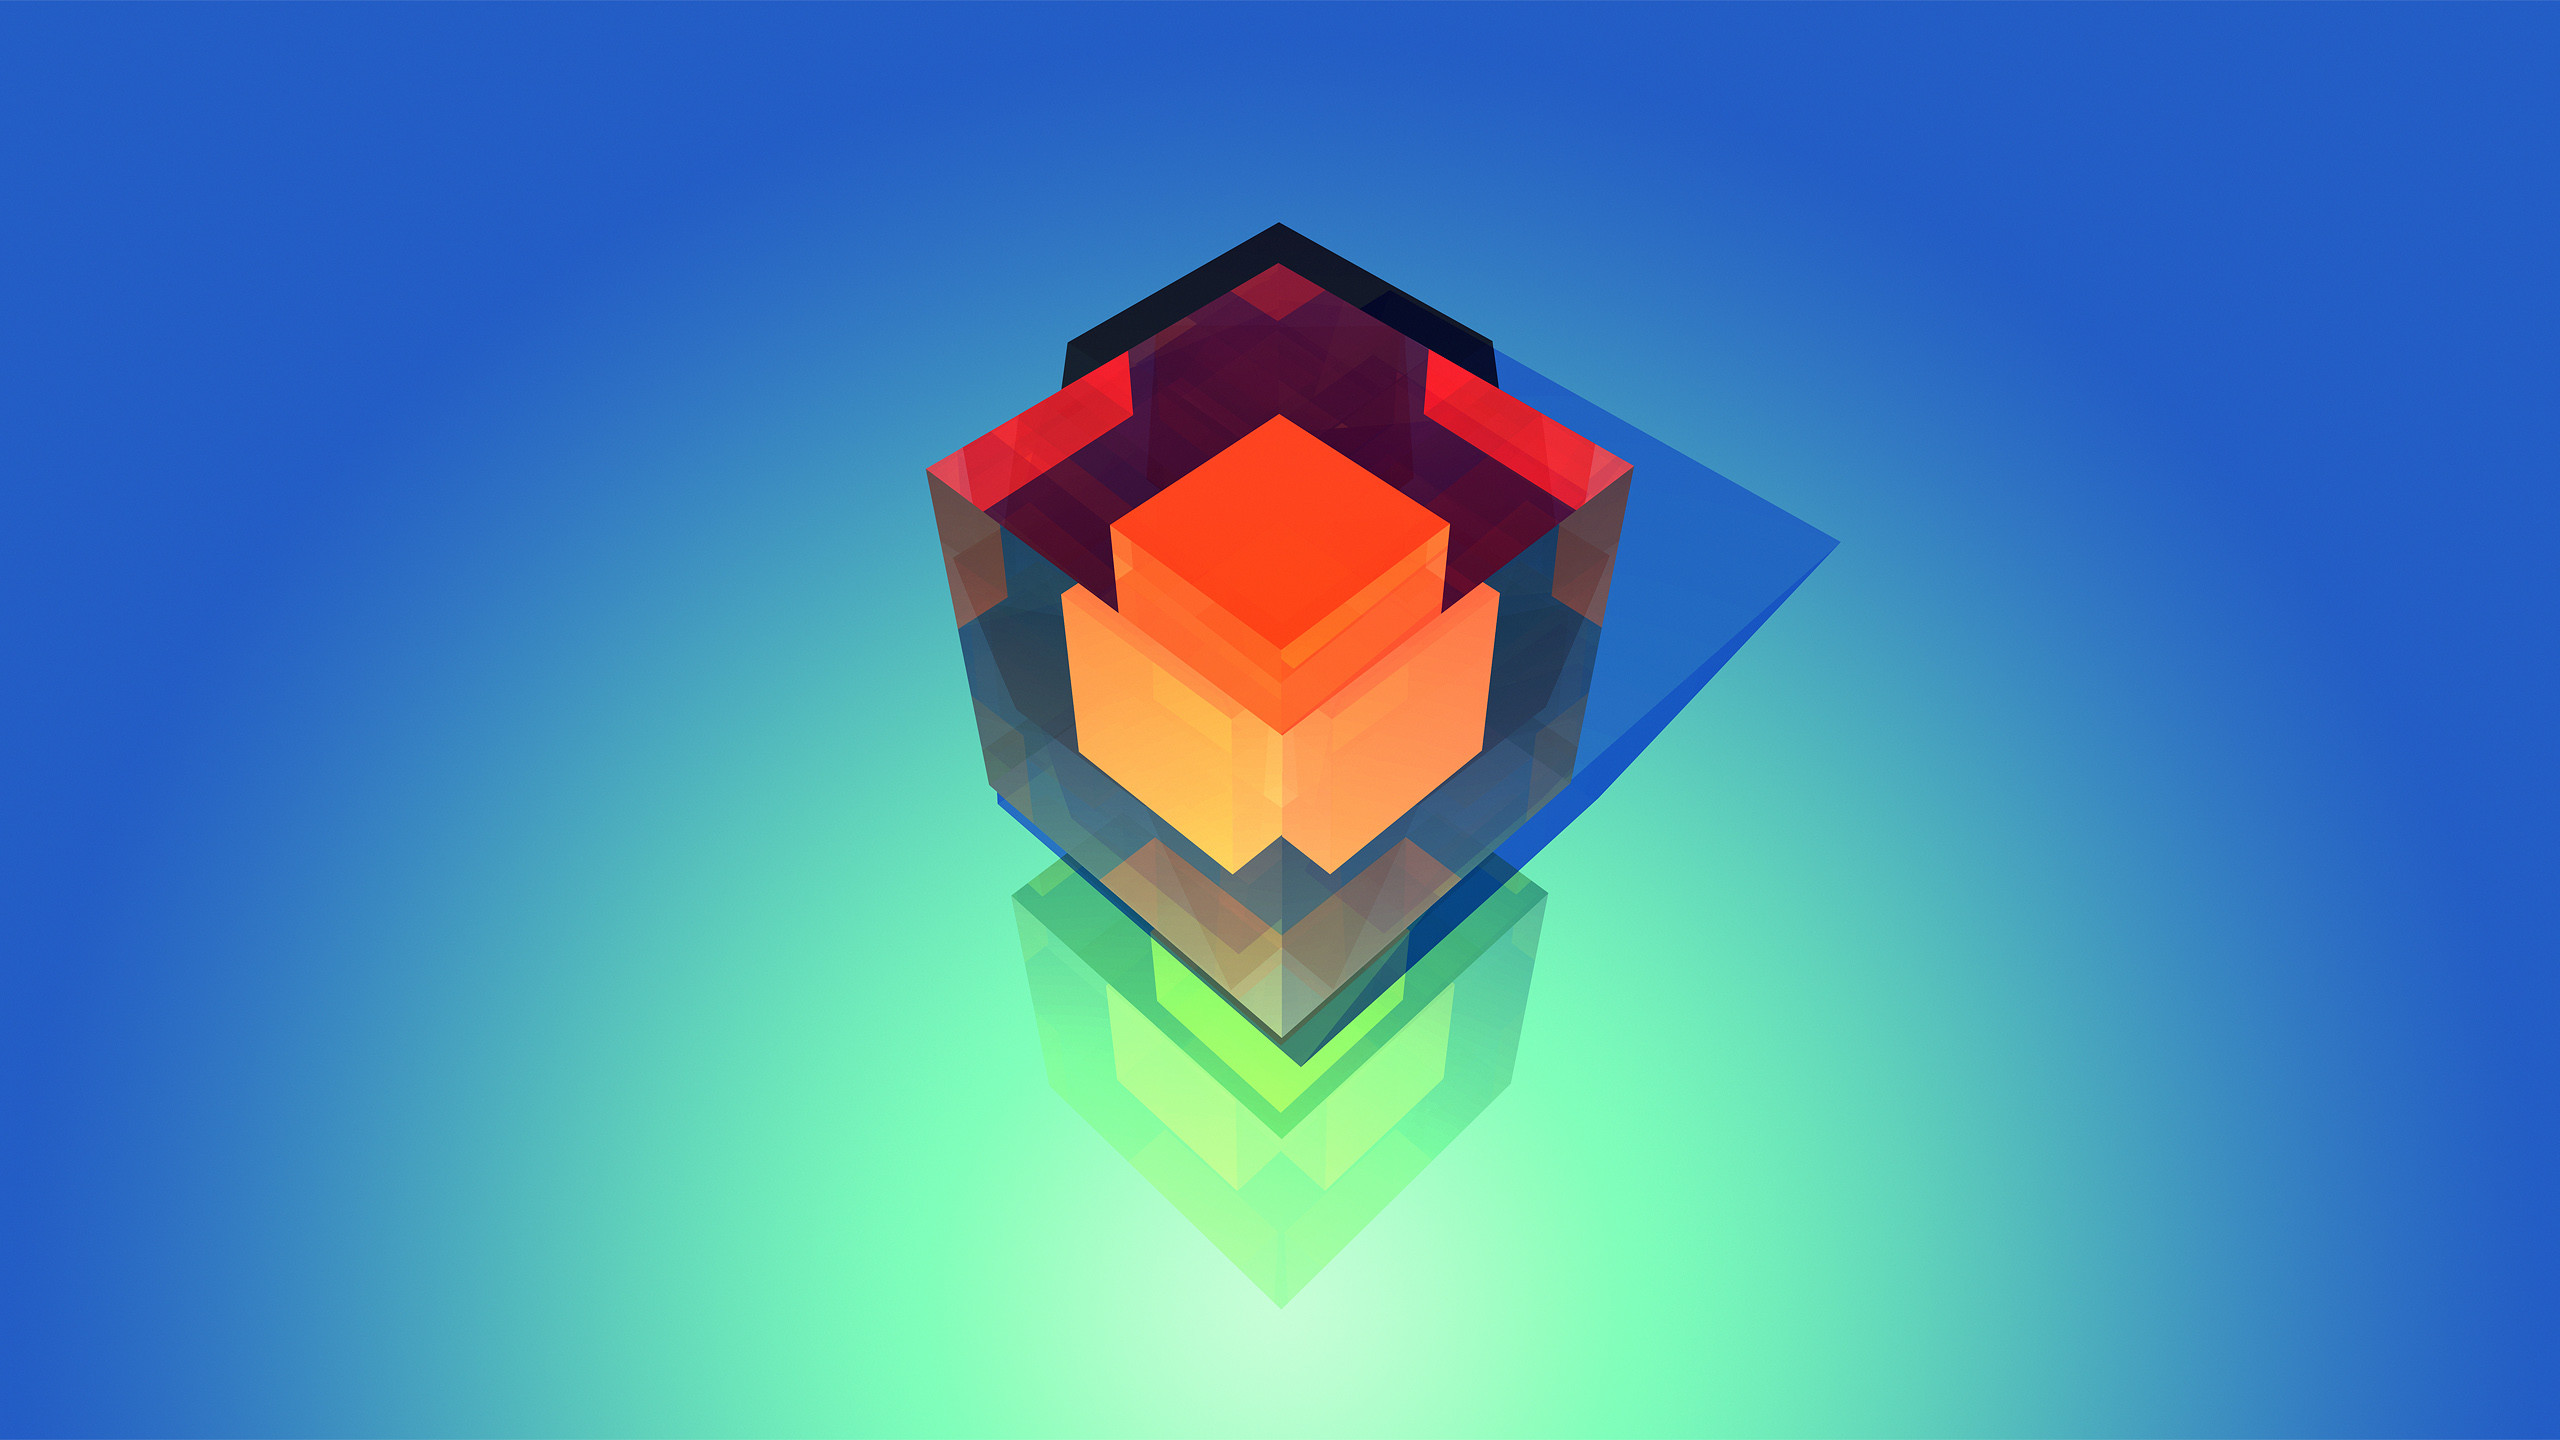 2560x1440 Explore Simple Things, Desktop Wallpapers, and more! justin maller ...